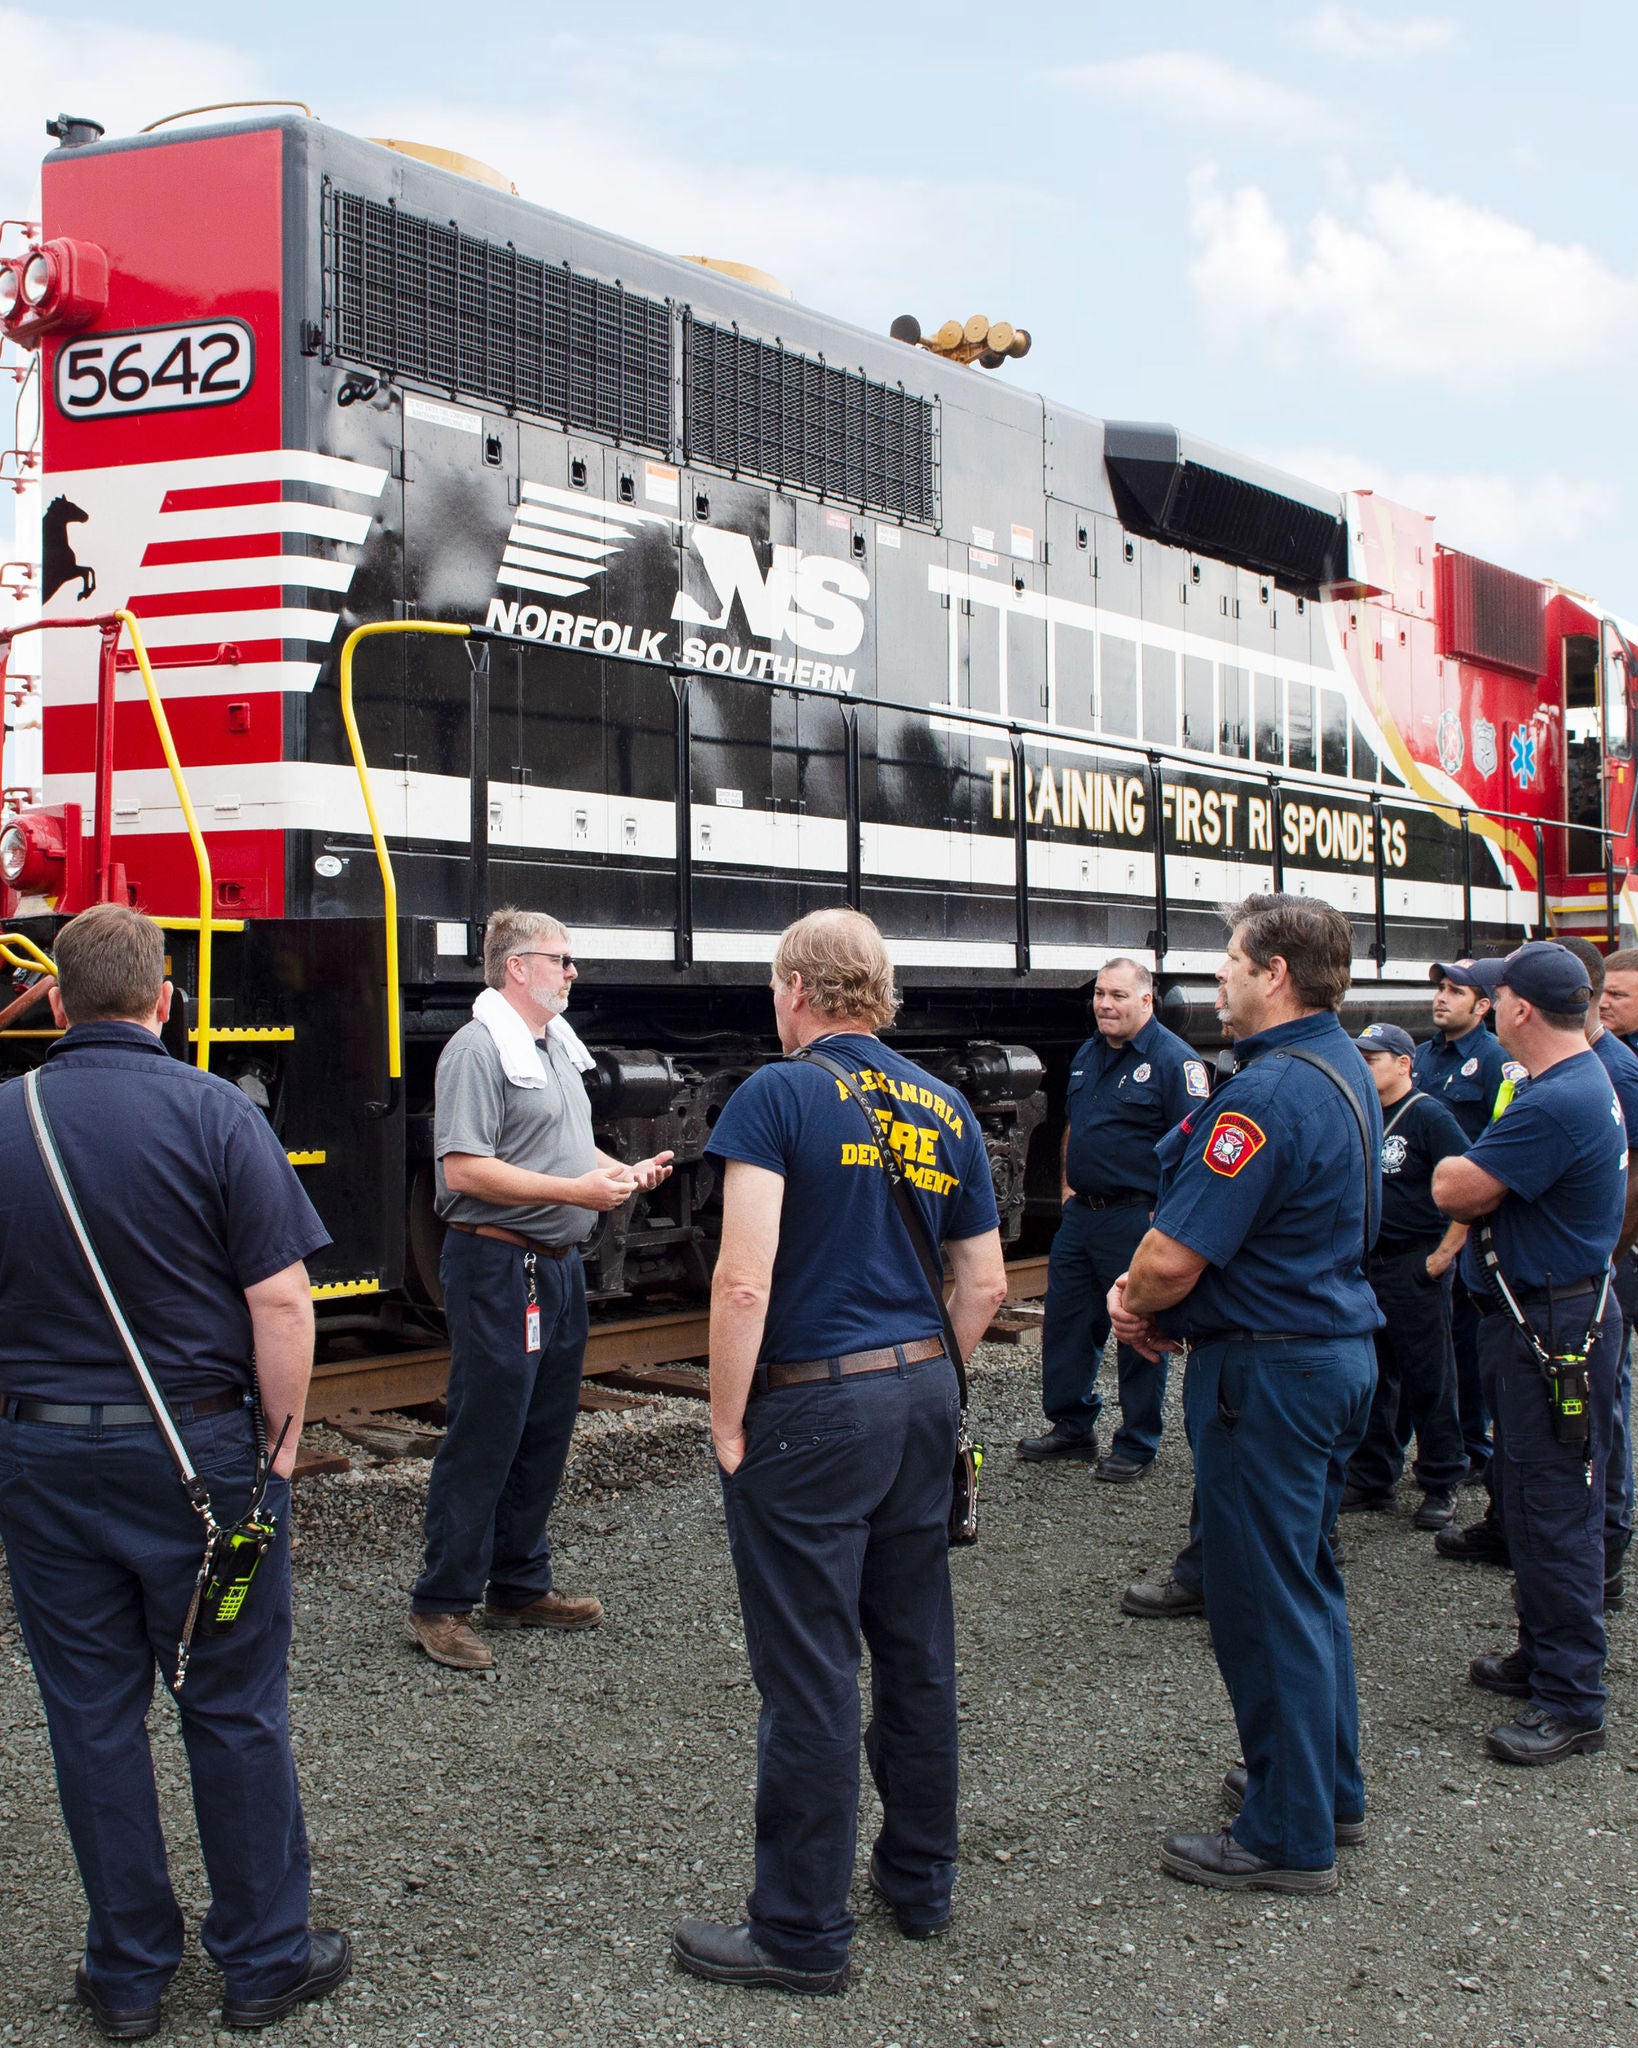 Group of first responders stand in front of a Norfolk Southern train discussing community safety